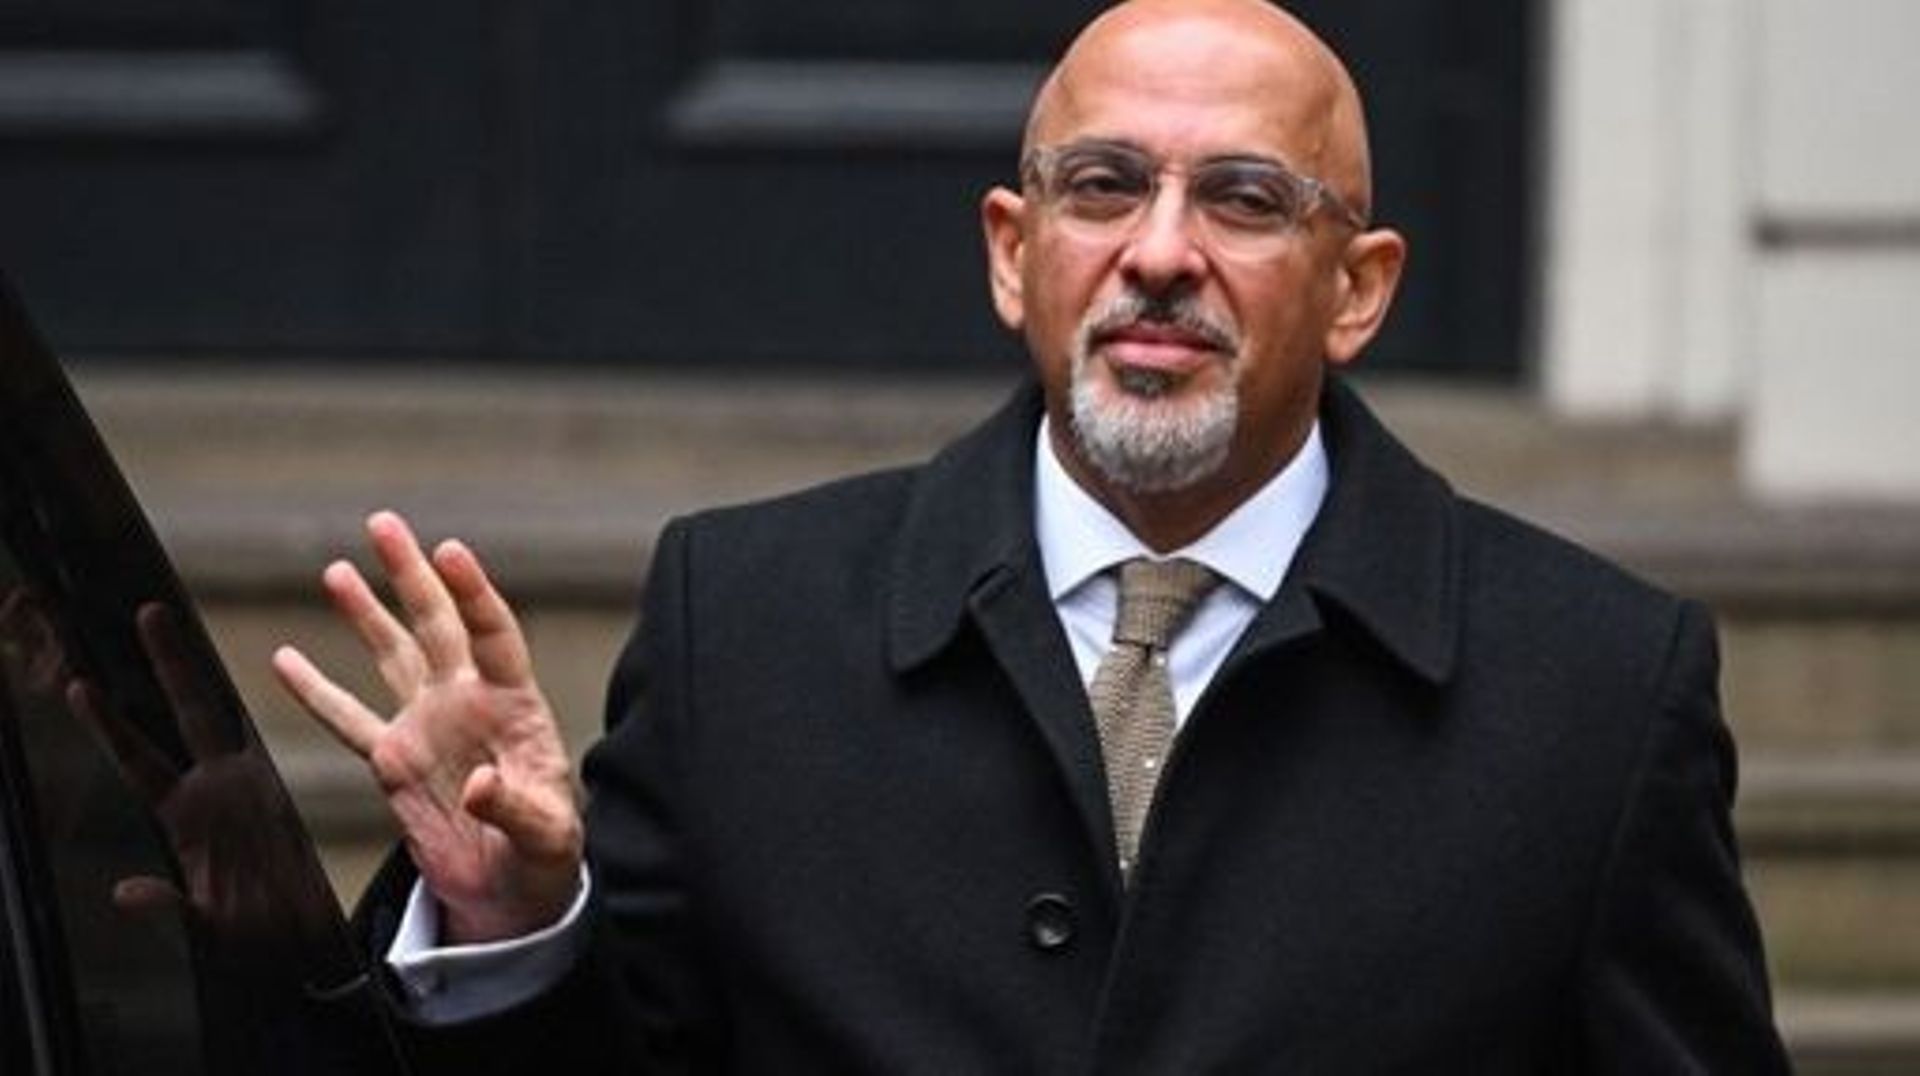 Britain’s Minister without Portfolio and Conservative party chairperson Nadhim Zahawi waves as he leaves the party head office in London, on January 24, 2023. British Prime Minister Rishi Sunak ordered an investigation into wealthy ally Zahawi’s murky tax